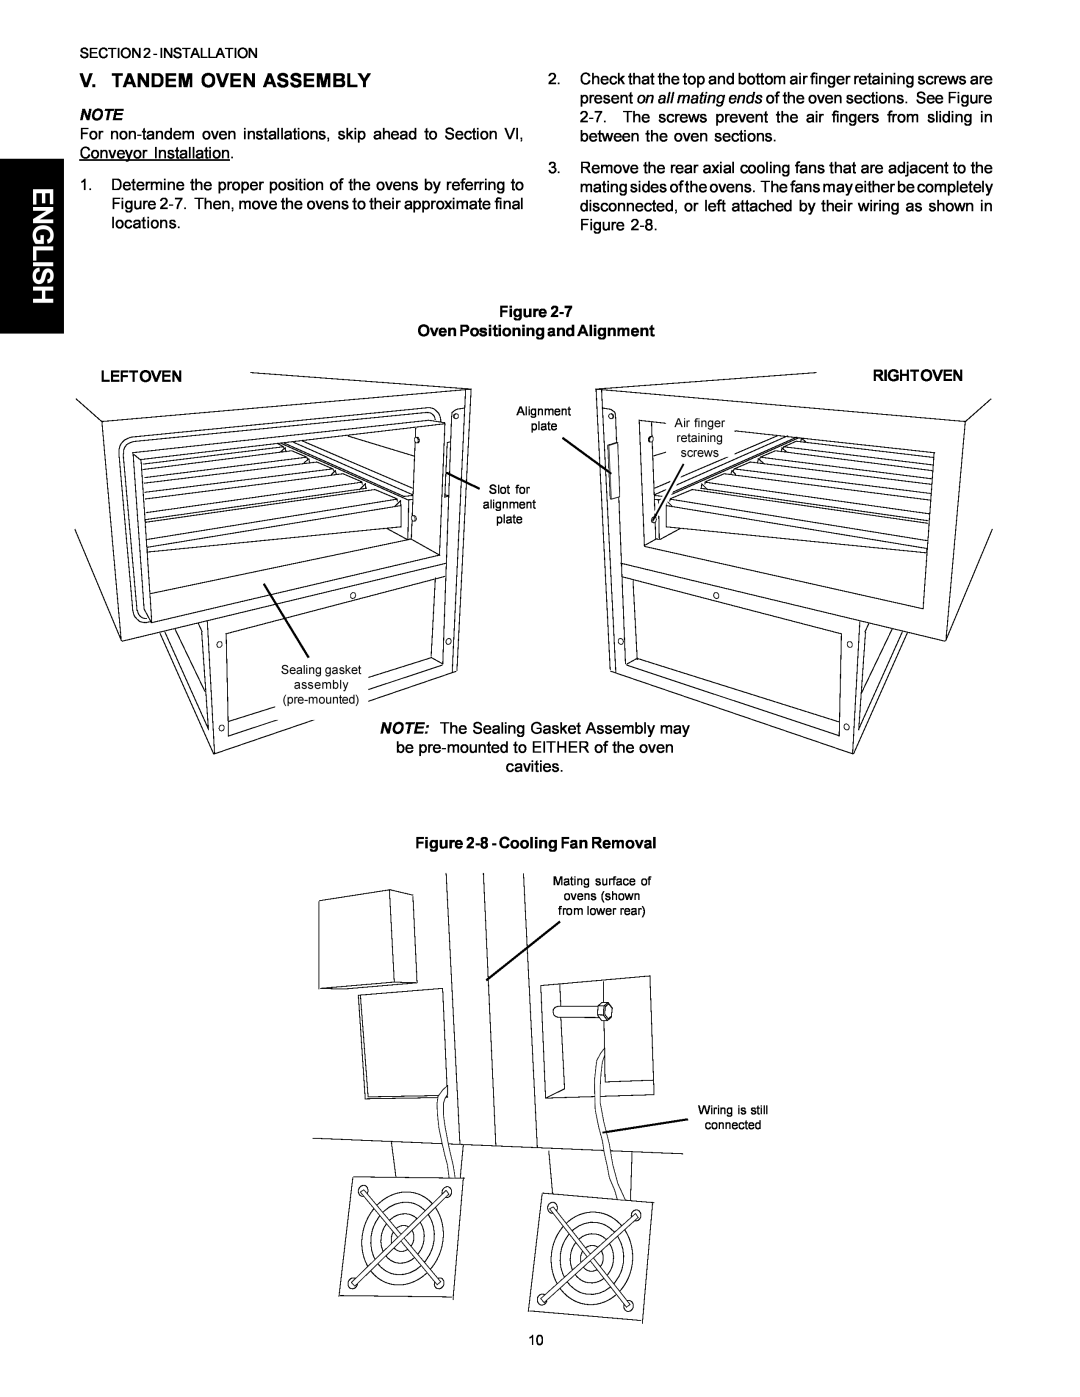 Middleby Marshall PS310, PS360WB English, V. Tandem Oven Assembly, Oven Positioning and Alignment, Leftoven, Rightoven 